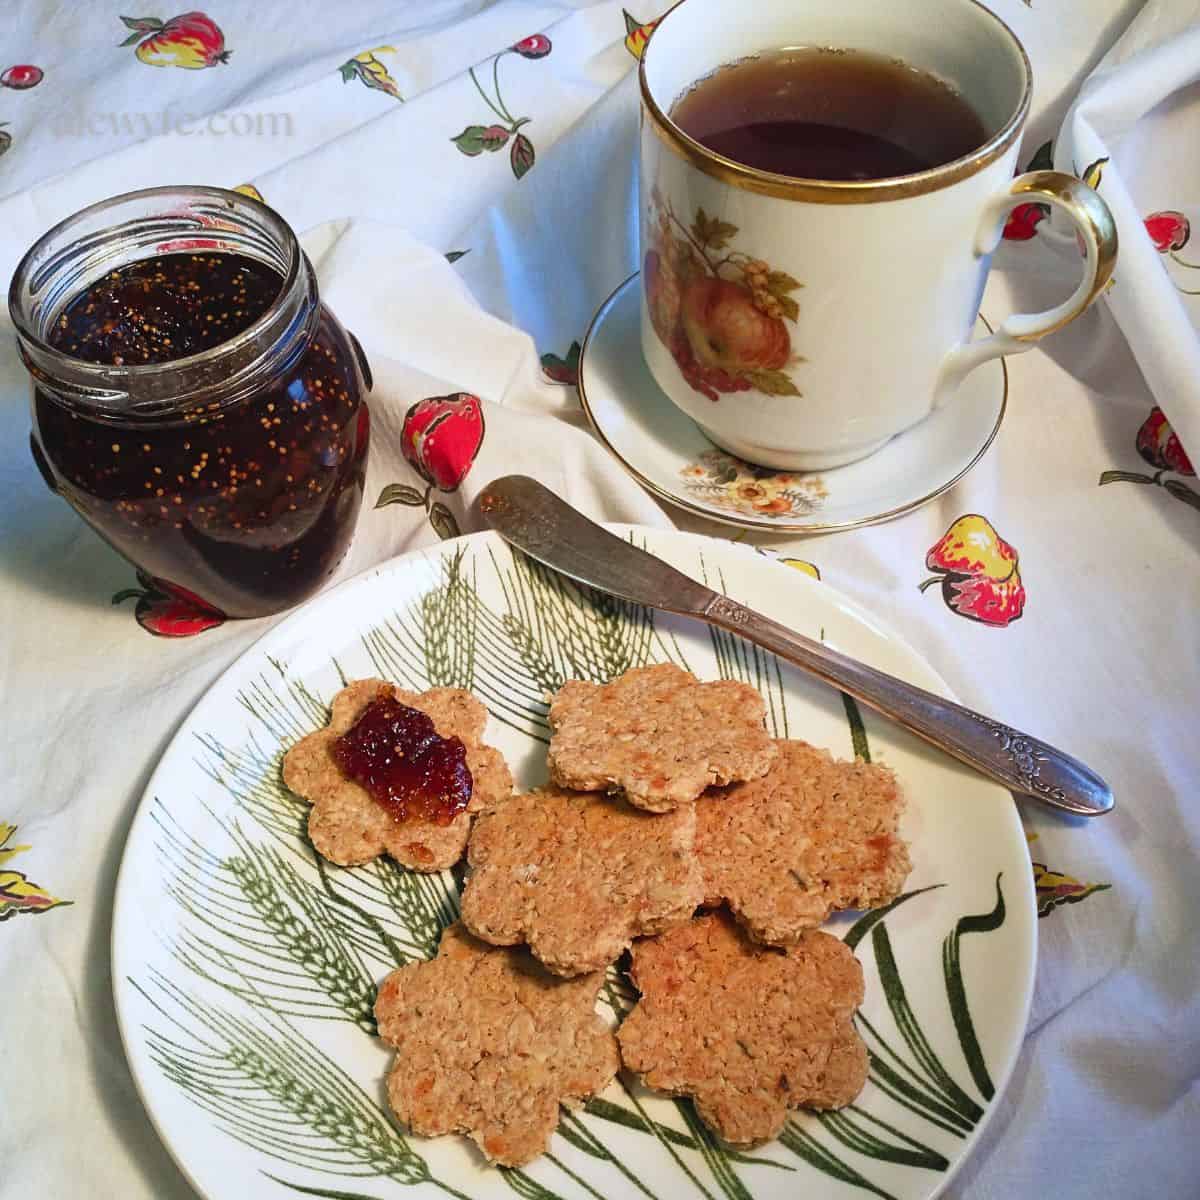 a plate of flower-shaped herb & cheese oatcakes with fig jam and a mug of tea.